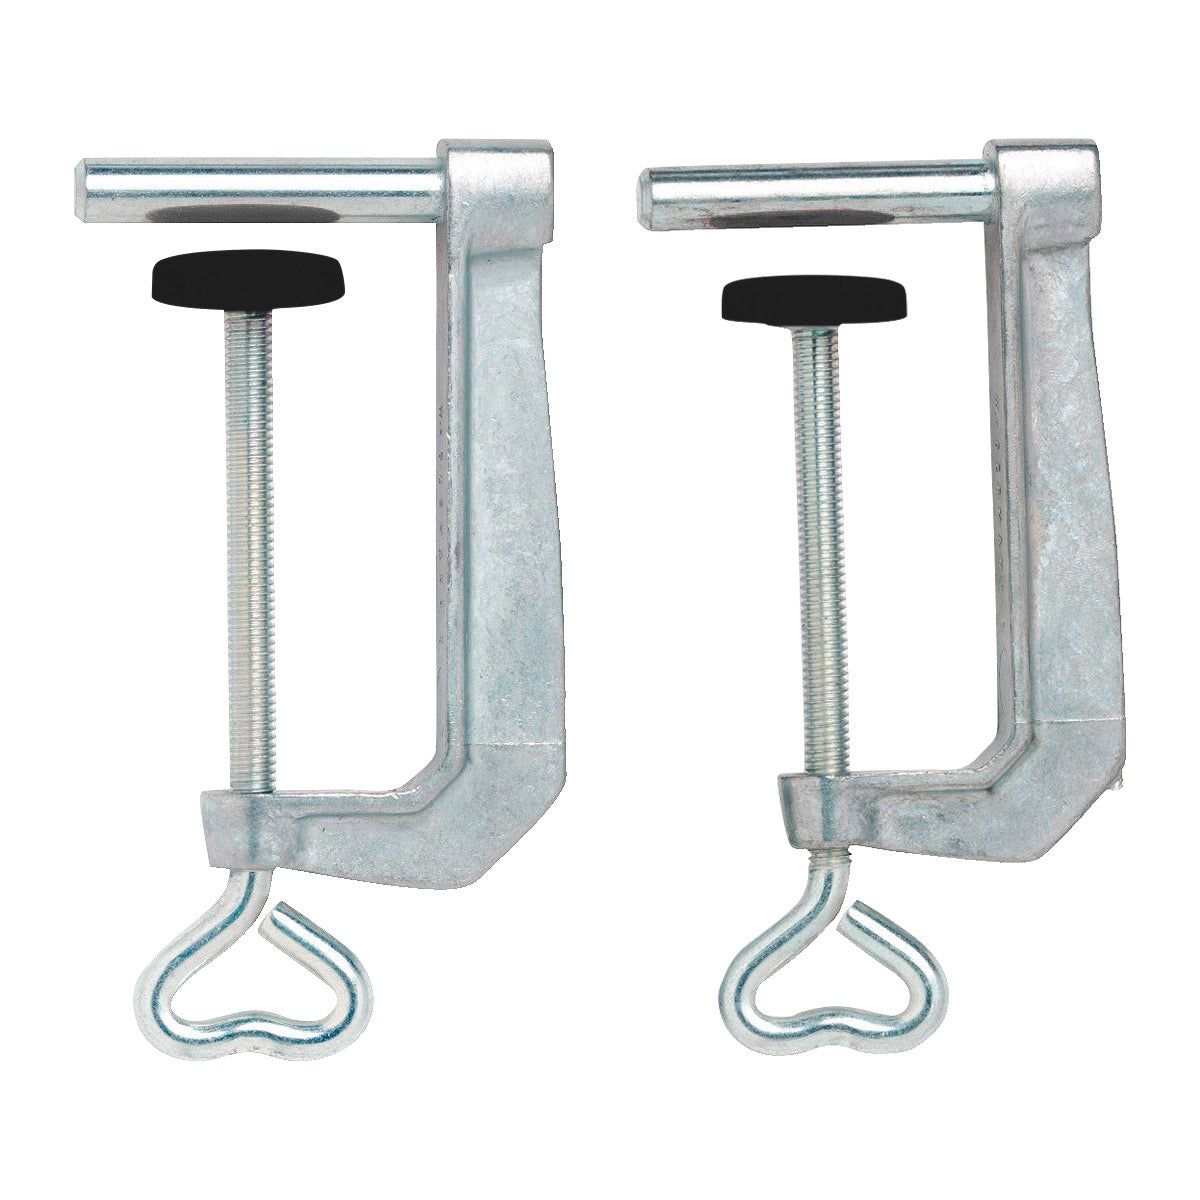 Toko Clamps for Cross Country Profile